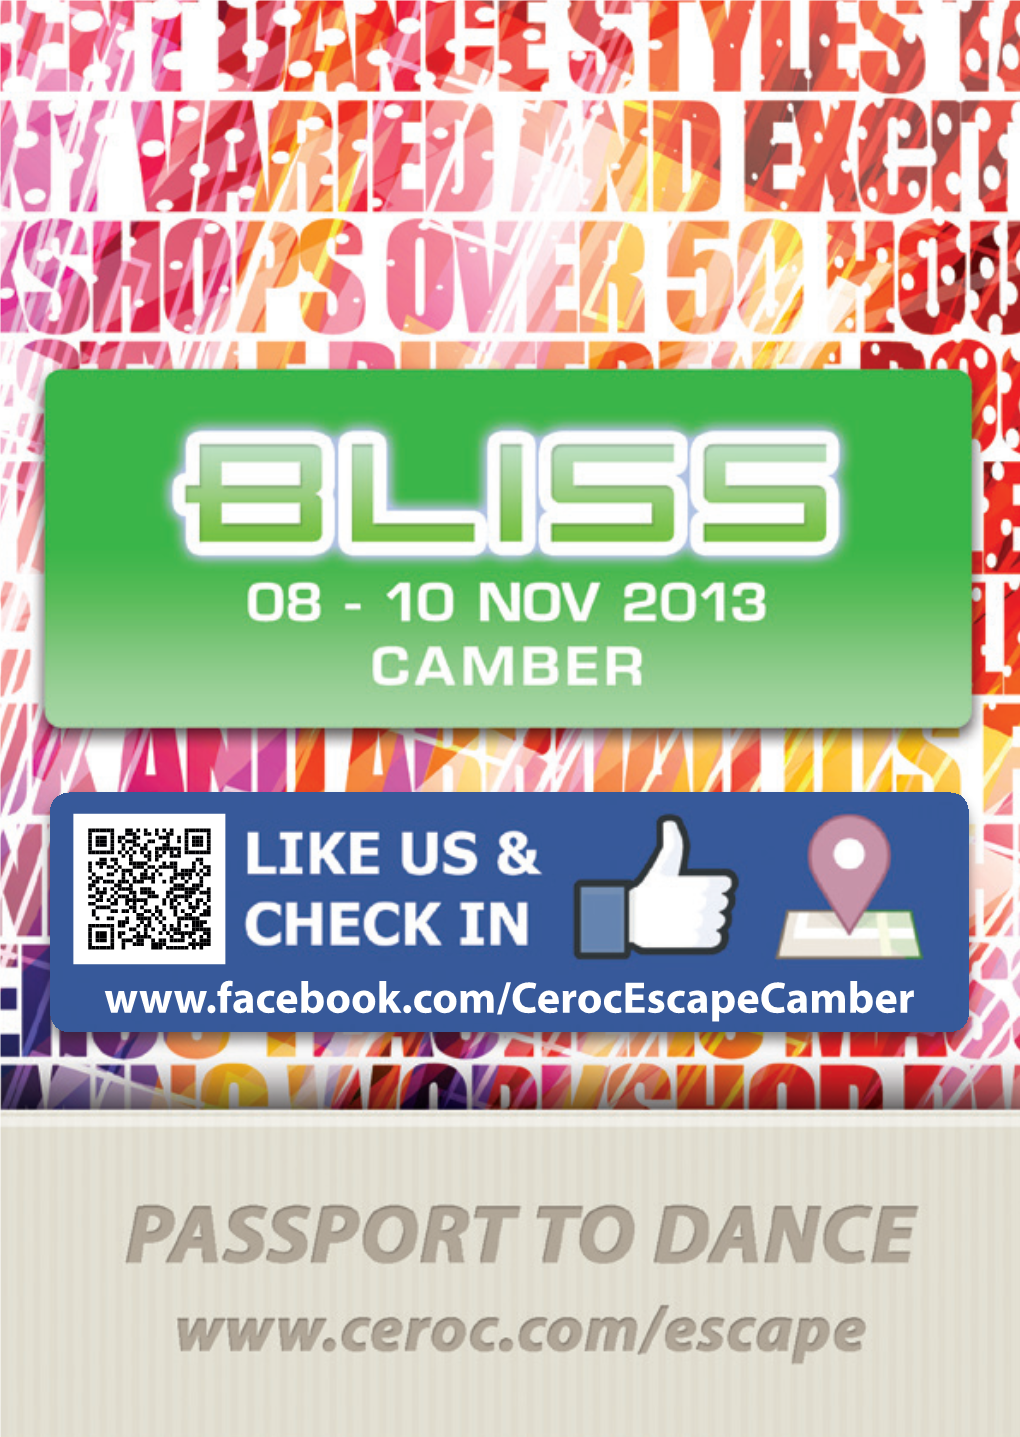 BLISS Camber 2013